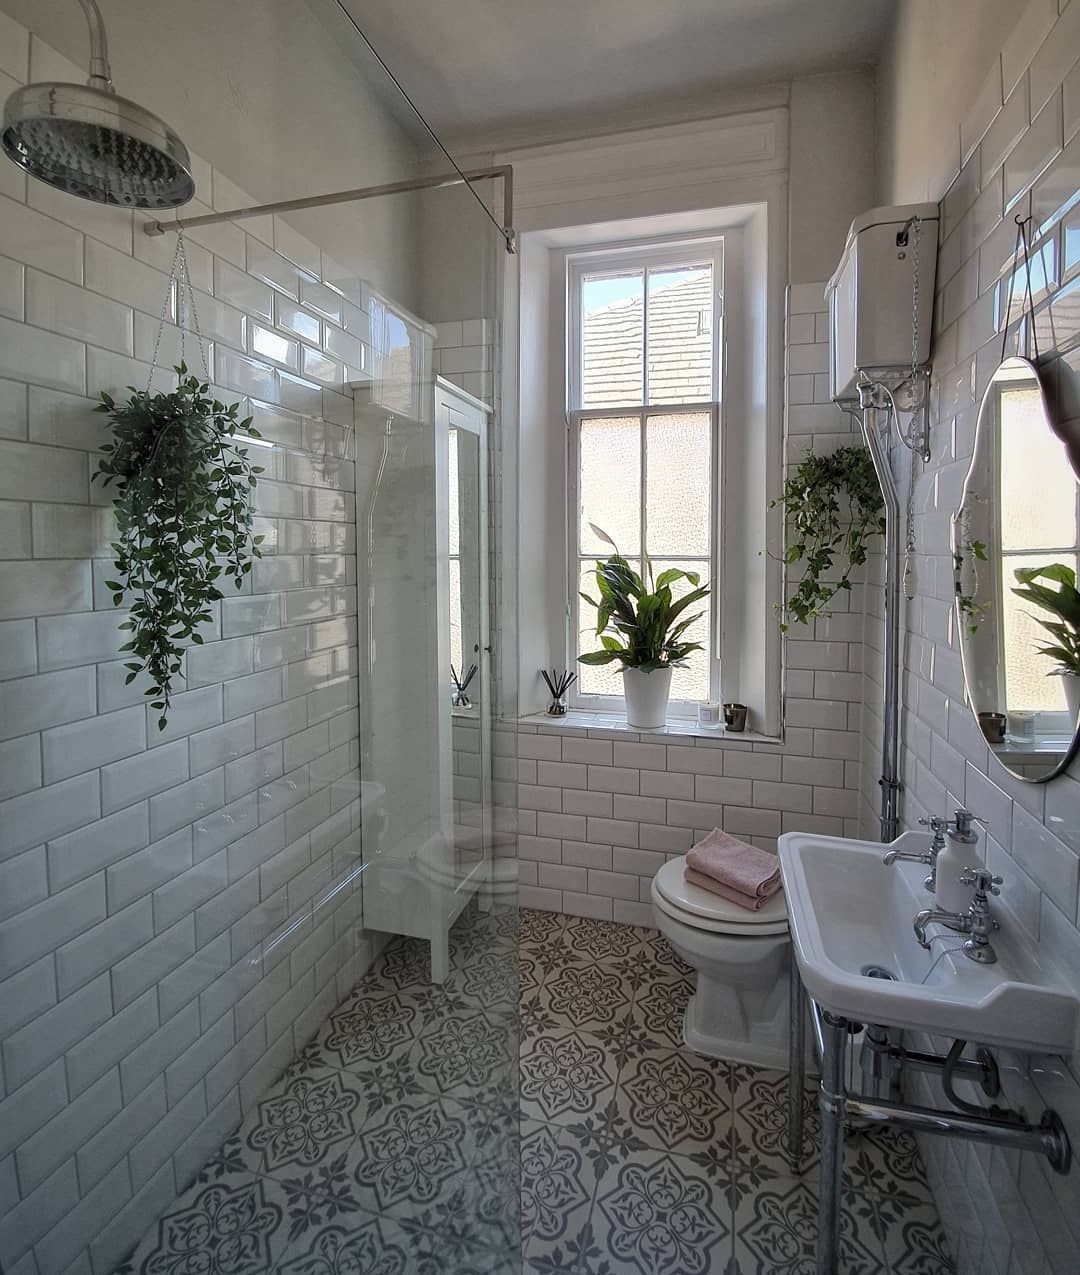 Lifestyle image of an Edwardian style bathroom, with grey patterned floor tiles, white wall tiles, a glass screened shower enclosure, a chrome washstand with a stepped basin and crosshead basin taps, an open back toilet with a high level cistern and a painted white bathroom cabinet